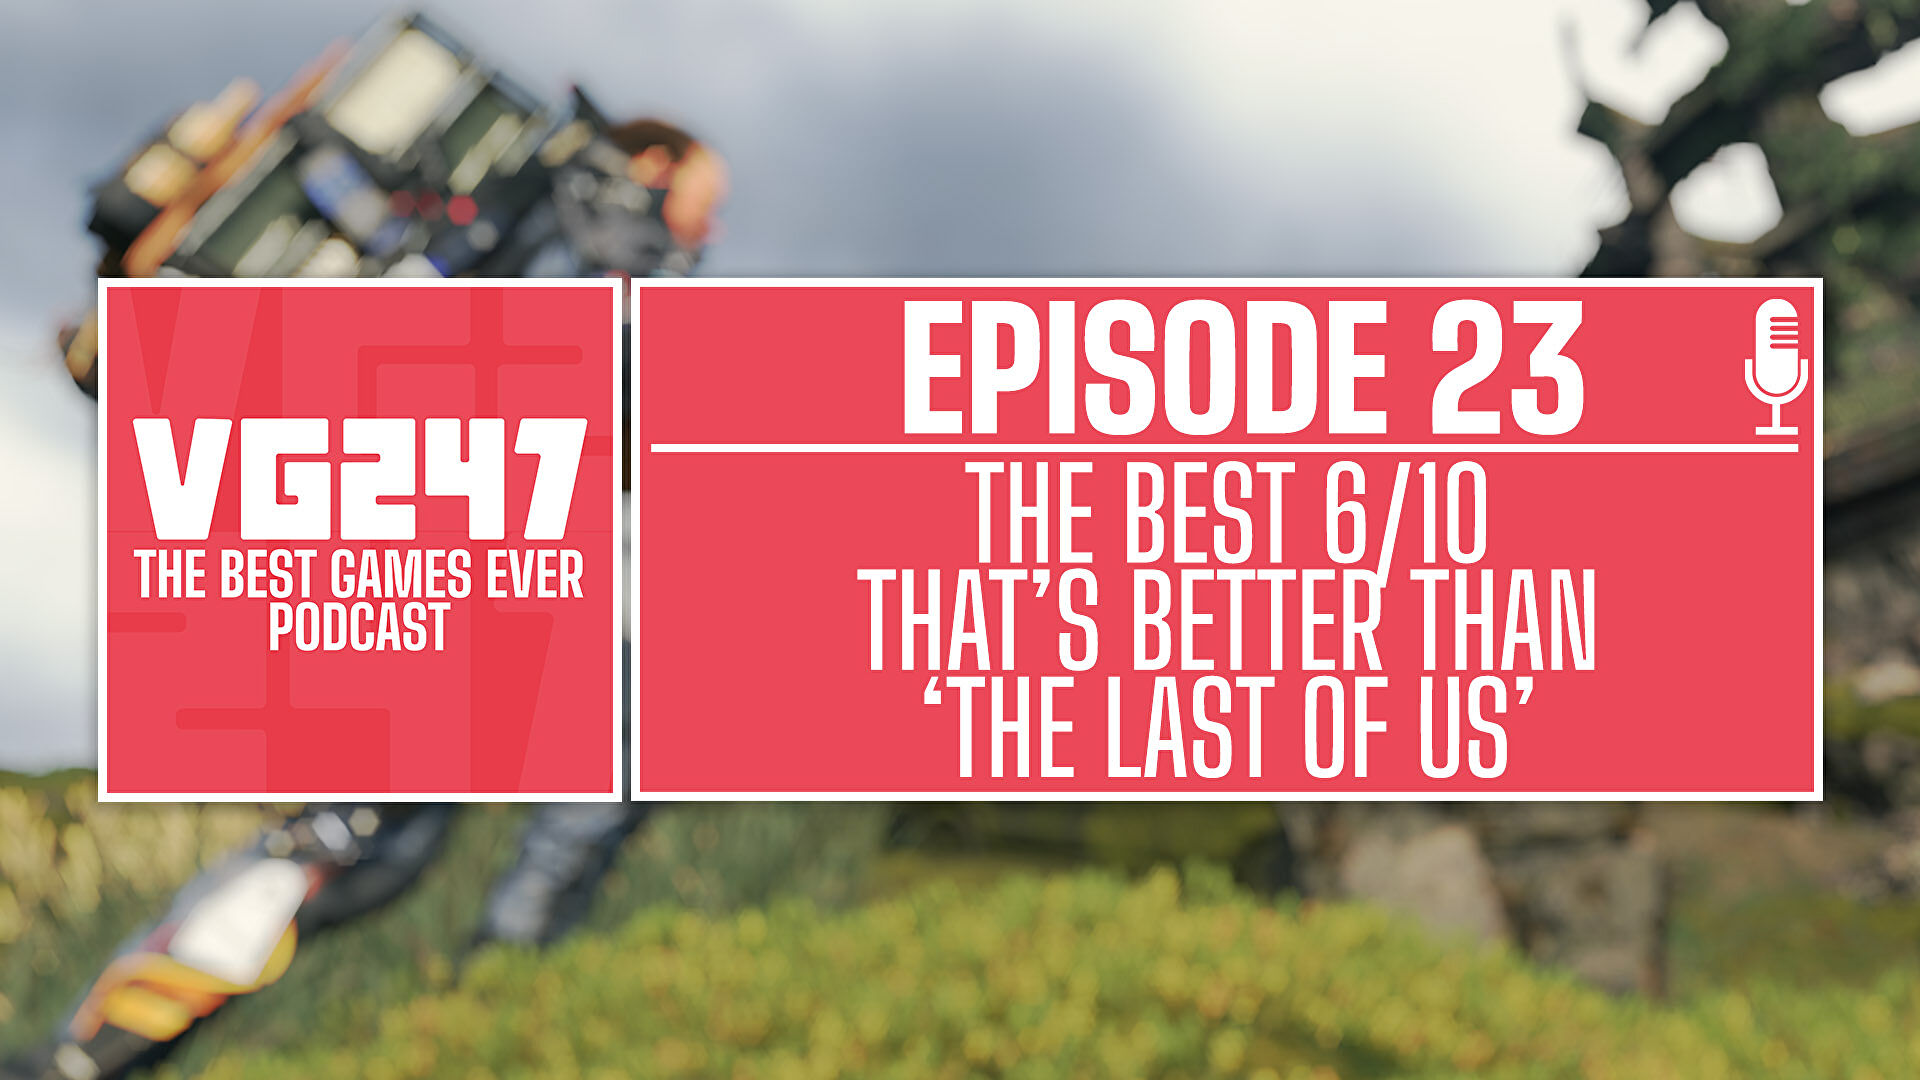 VG247’s The Best Games Ever Podcast – Ep.23: The best 6/10 that’s better than The Last of Us